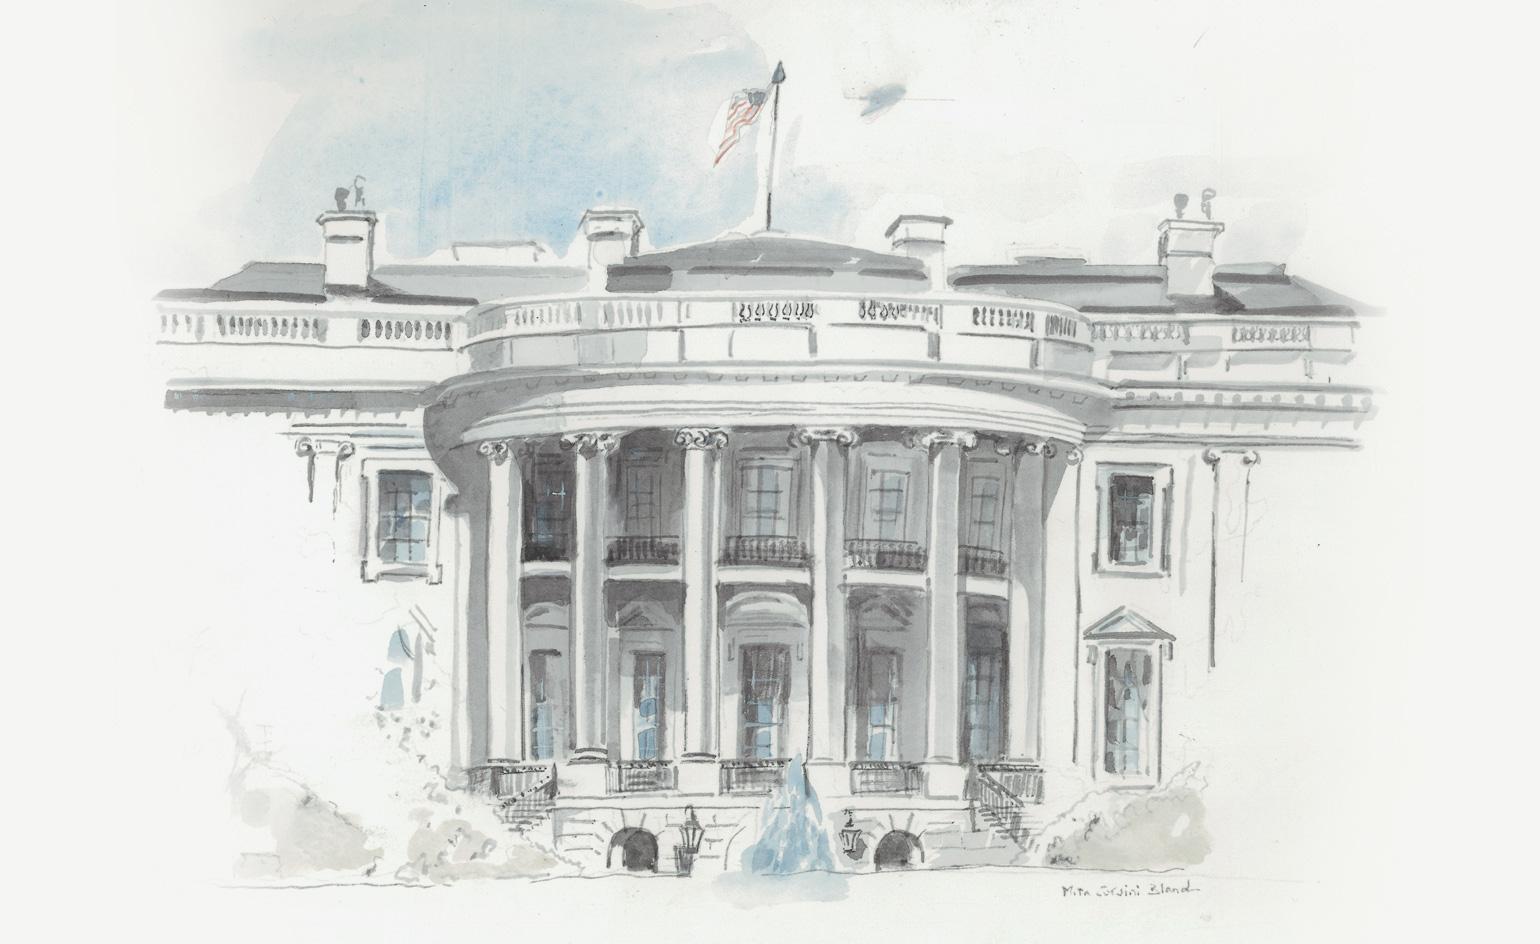 Collection of White House Wallpaper (image in Collection)